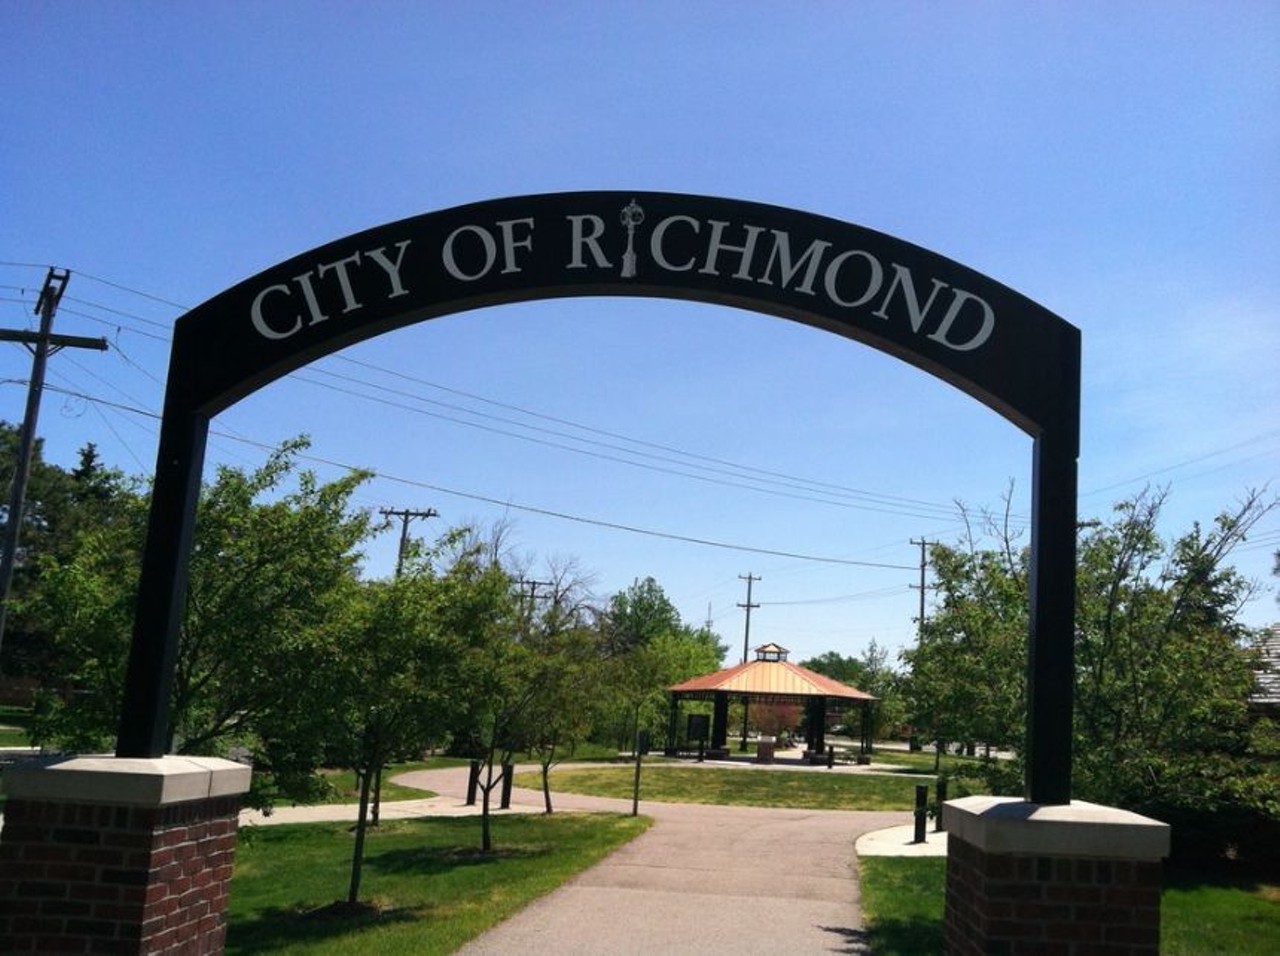 Richmond
What to do: Richmond is the definition of a small town. Located just north of New Haven, Richmond has everything necessary in order to give it a small town feel. Its main street is lined with small stores and shops for your everyday shopping needs. There are also community events throughout the year, so make sure to look at their calendar. 
Photo via Four Square user Thomas B.